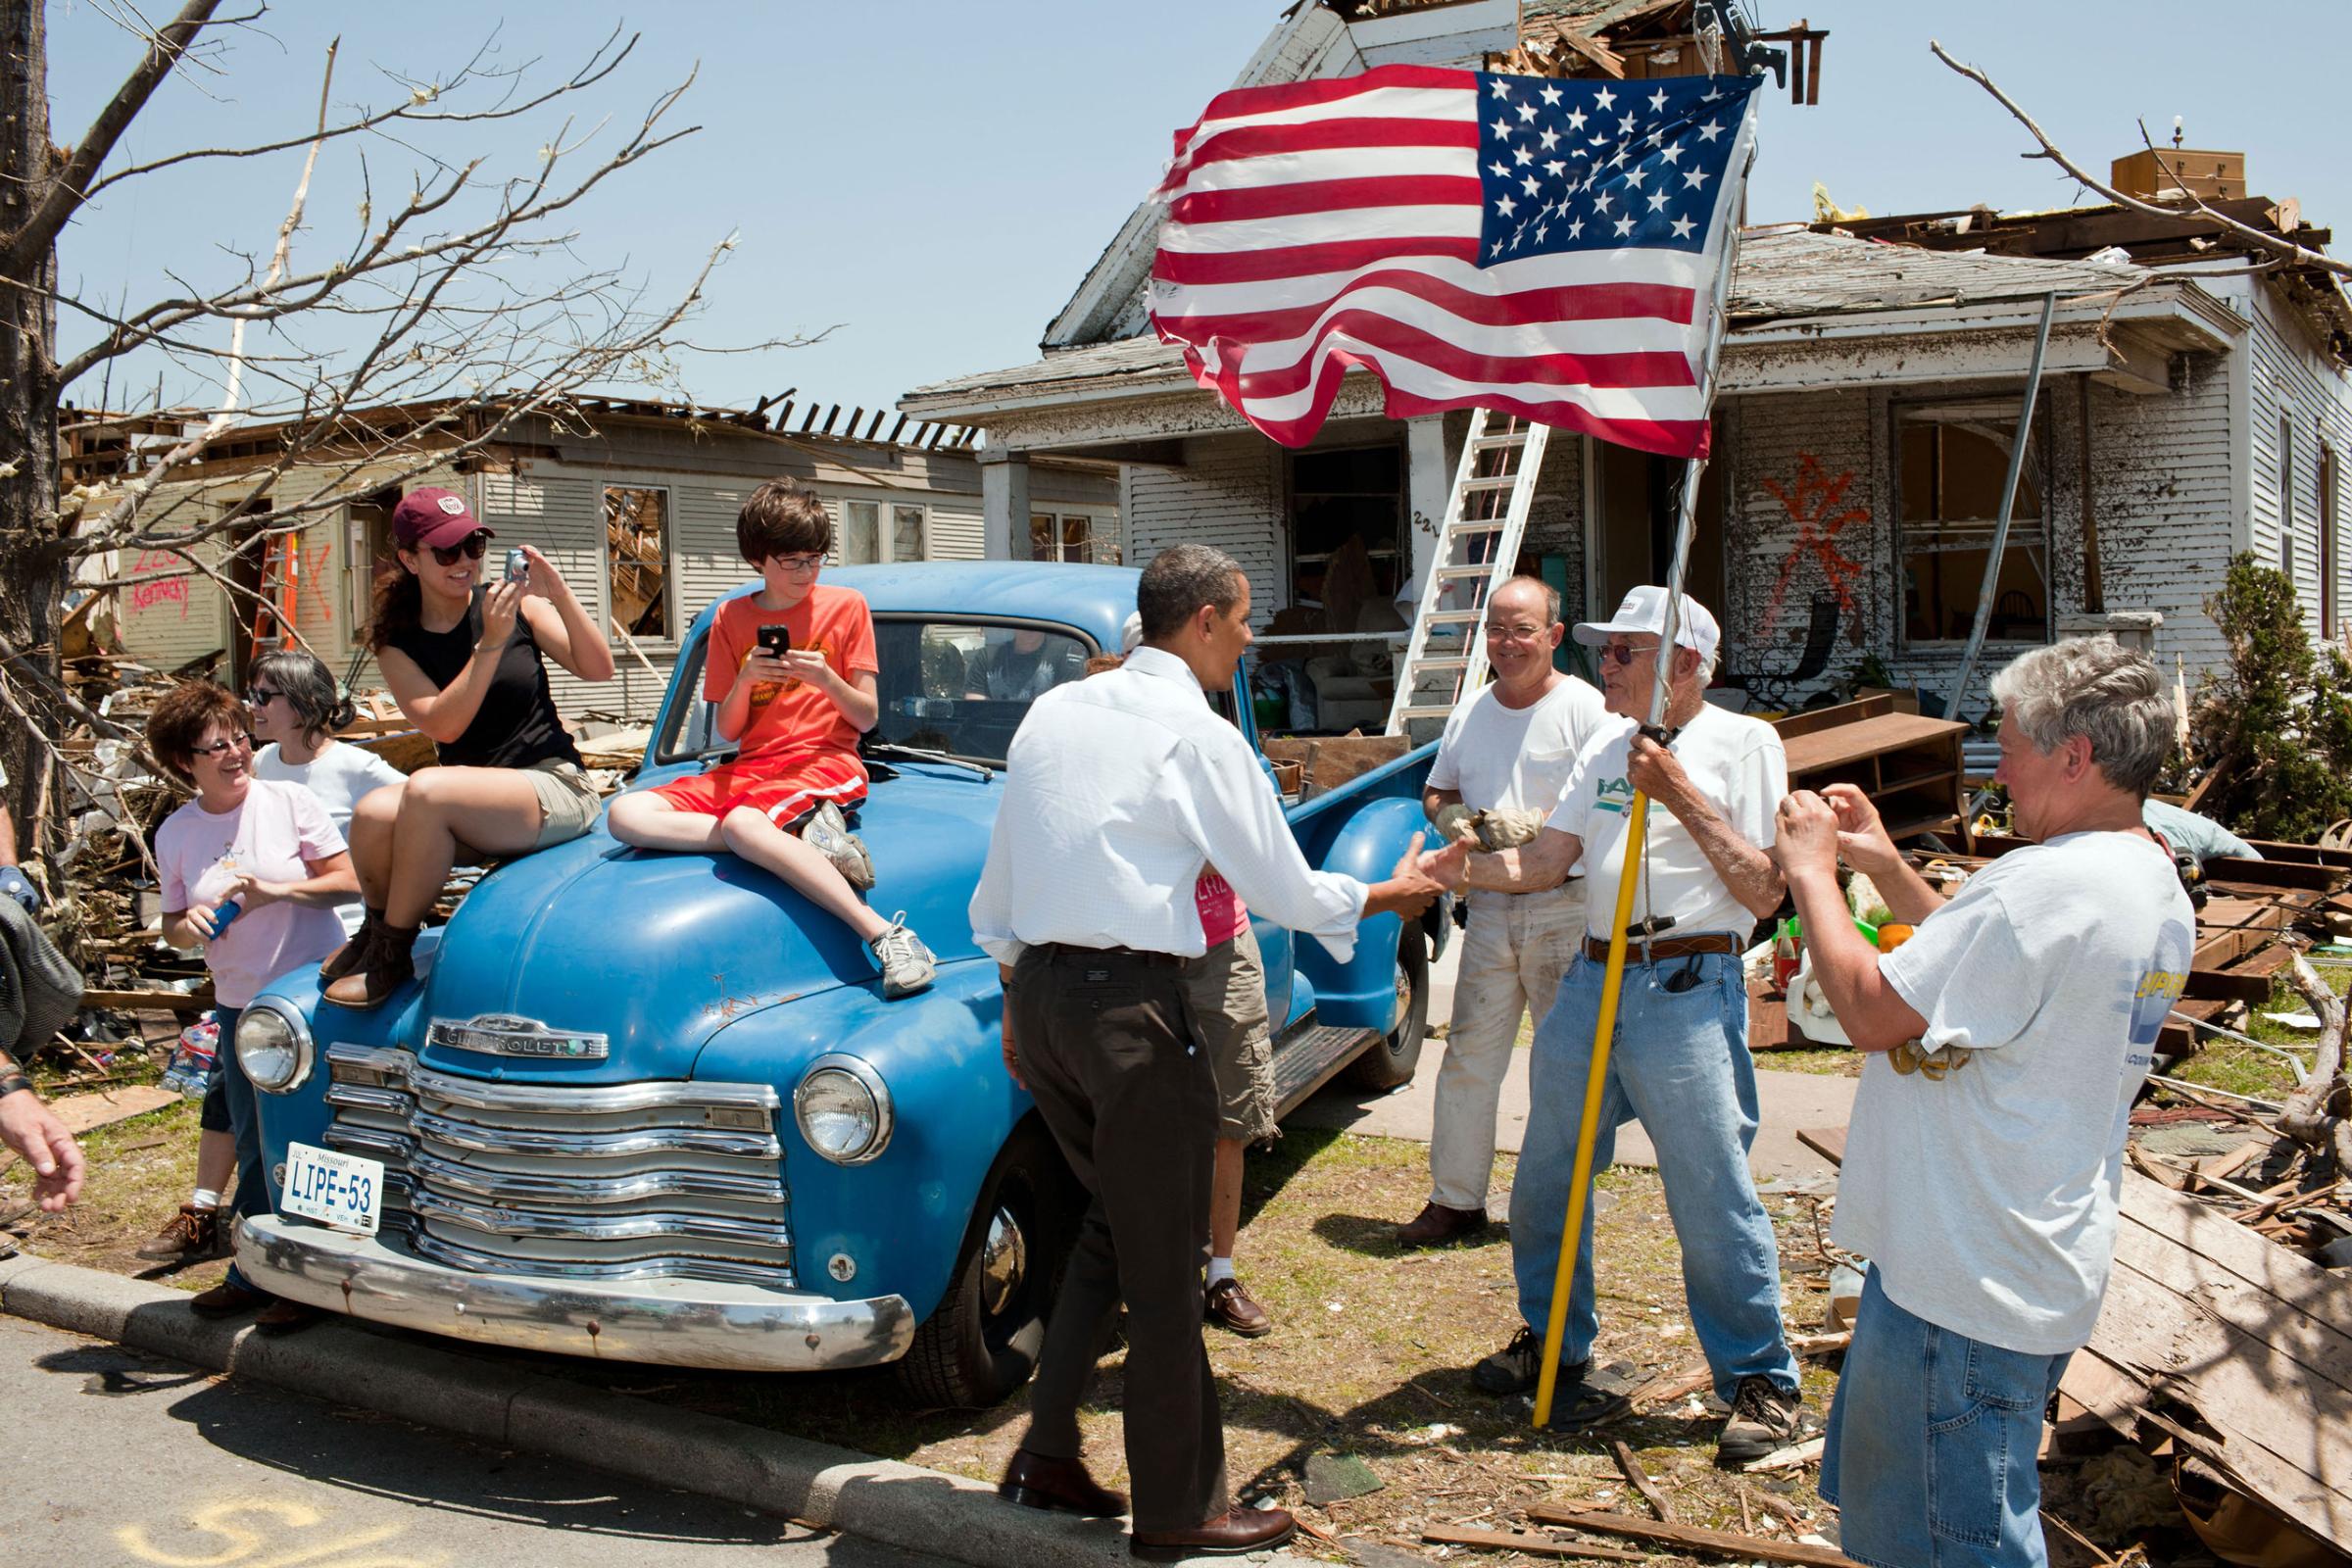 The President visits Joplin, Mo., on May 29, 2011, following a devastating tornado. Here he greets Hugh Hills, 85, in front of his home. Hills told the President he hid in a closet during the tornado, which destroyed the second floor and half the first floor of his house.